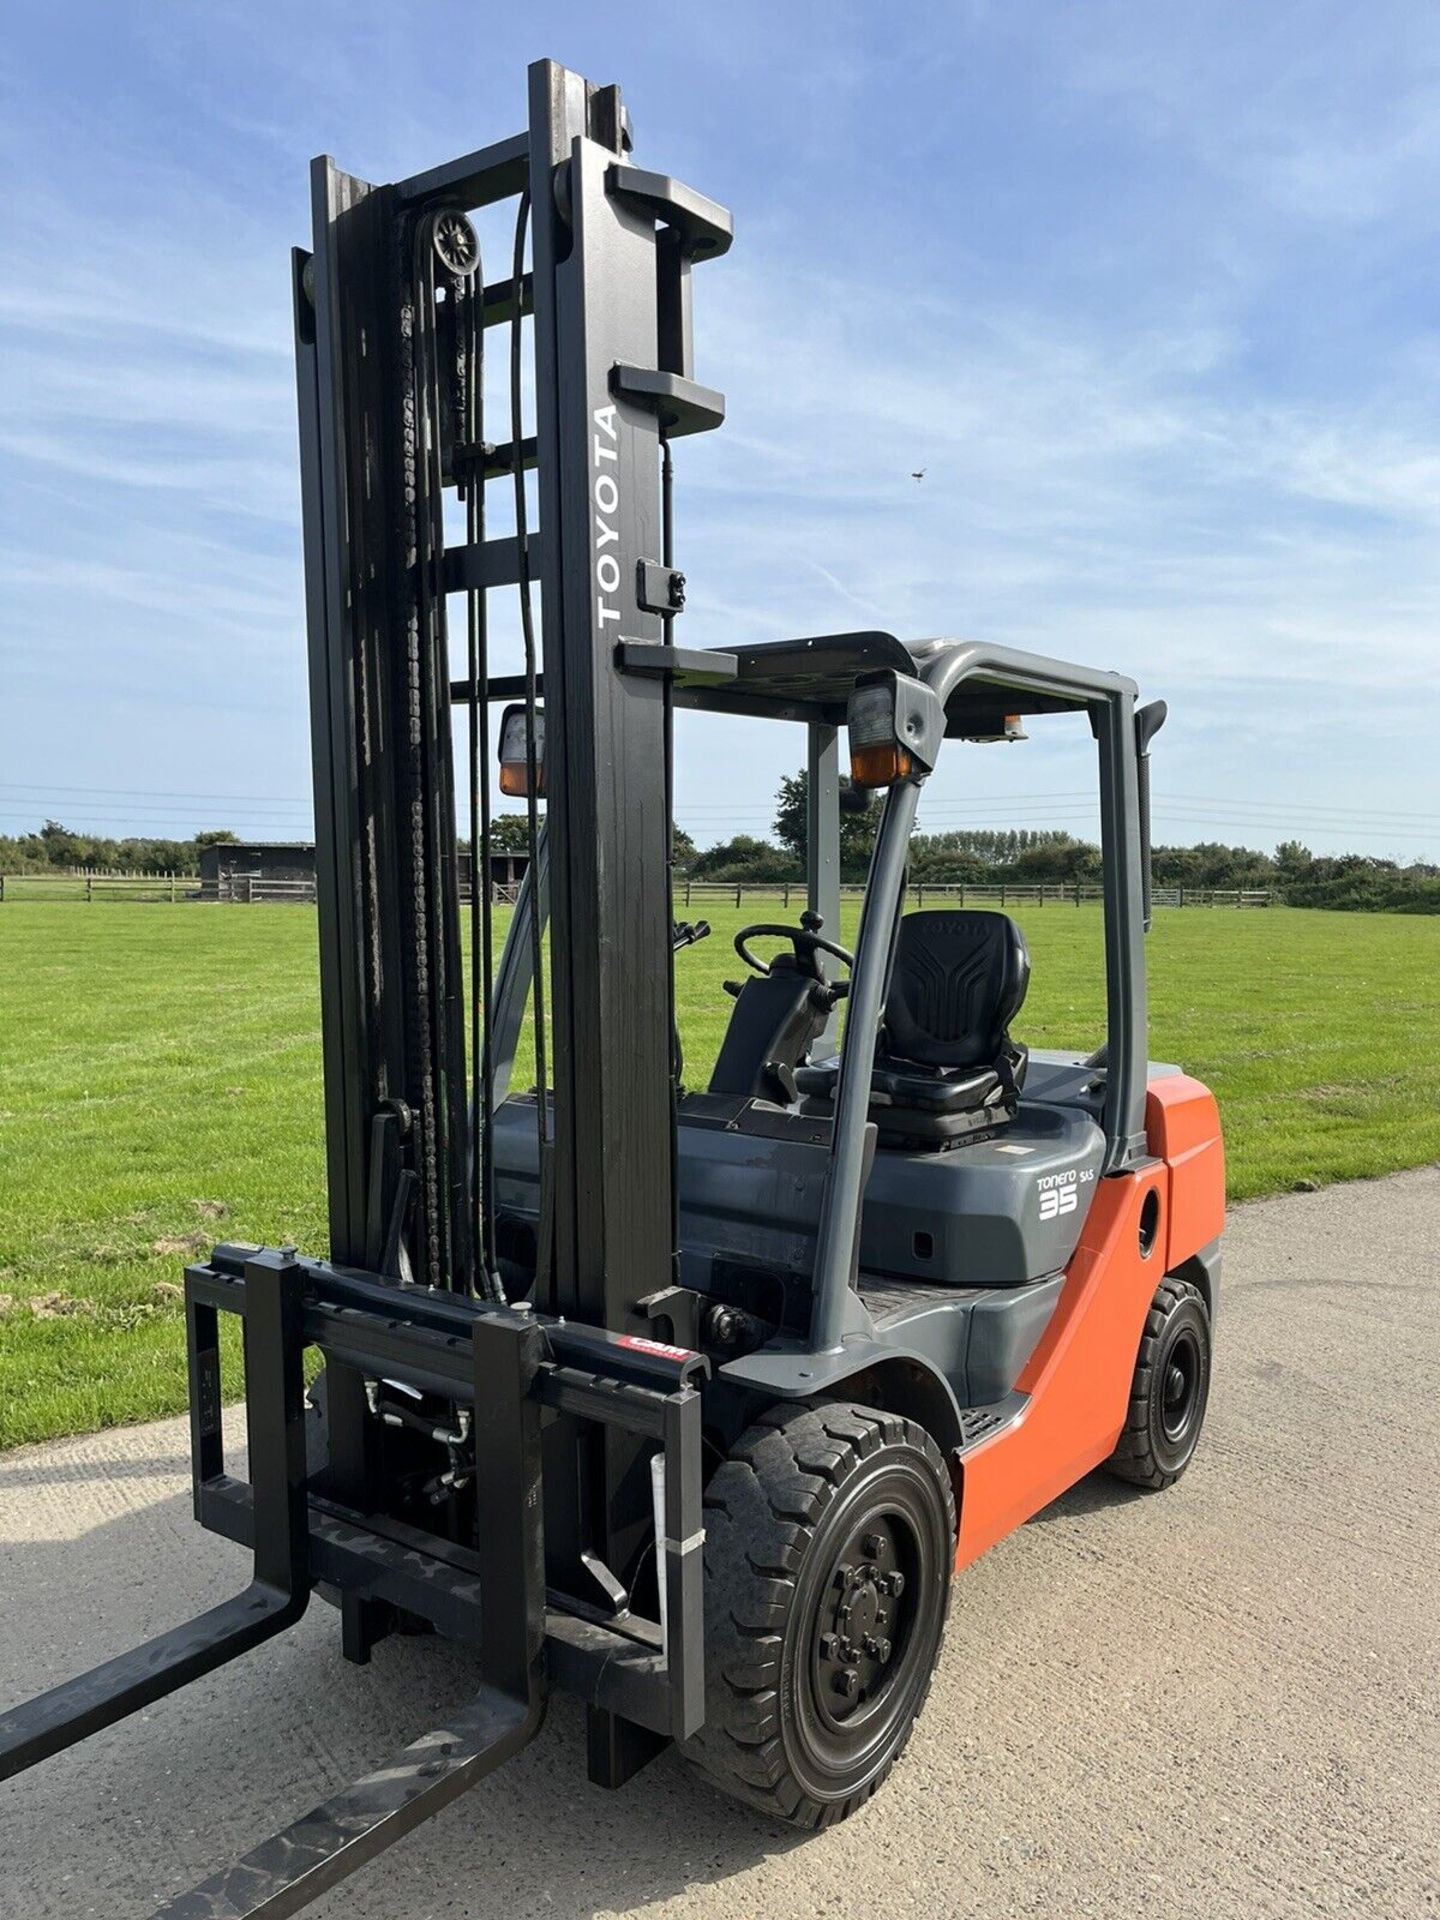 Toyota 3.5 Tonne Diesel Forklift Low Hours 2016 - Image 2 of 6